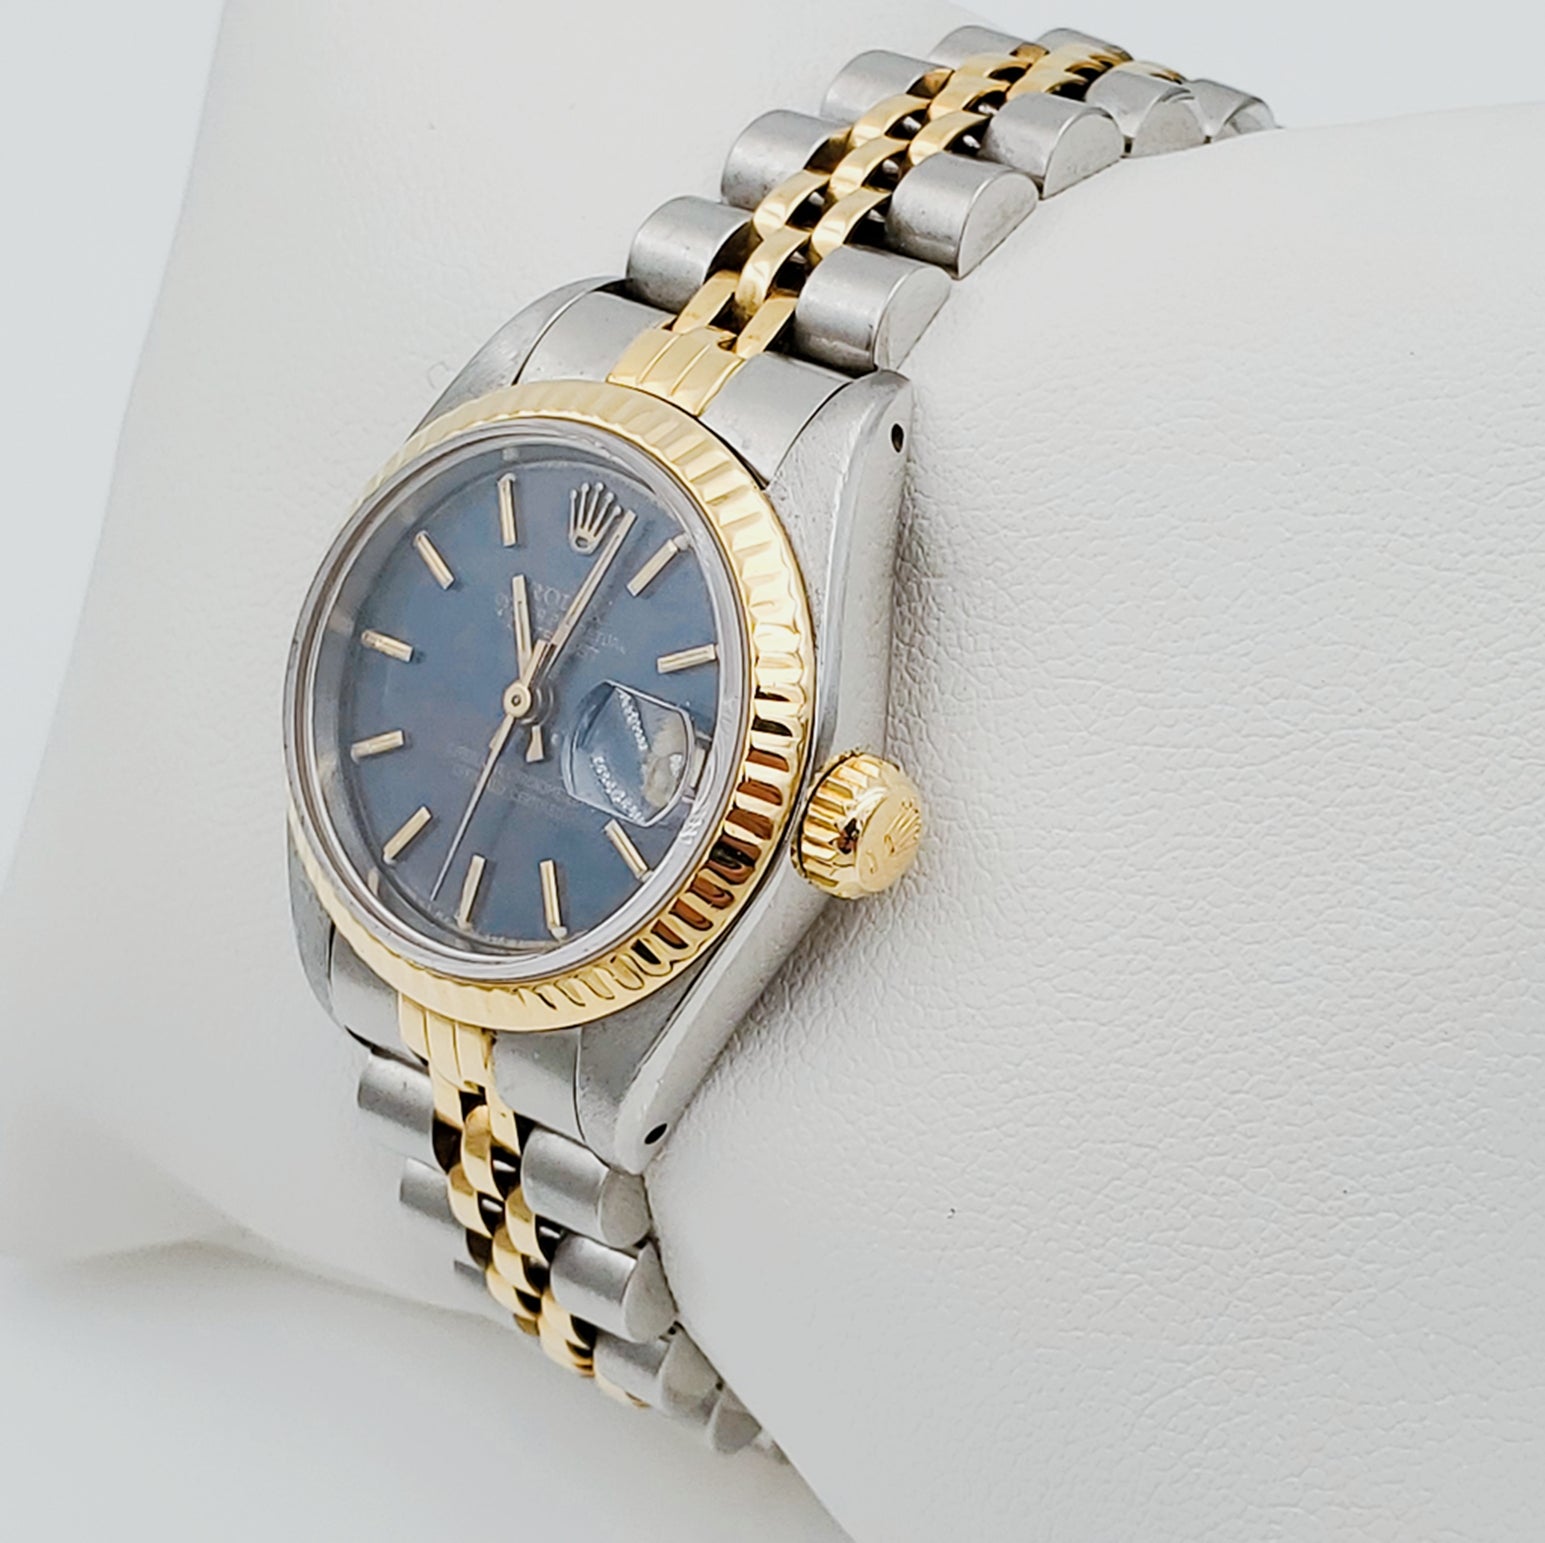 Women's Rolex 26mm Two-Tone DateJust 18K Gold Watch with Blue Dial and 18k Fluted Bezel. (Pre-Owned)